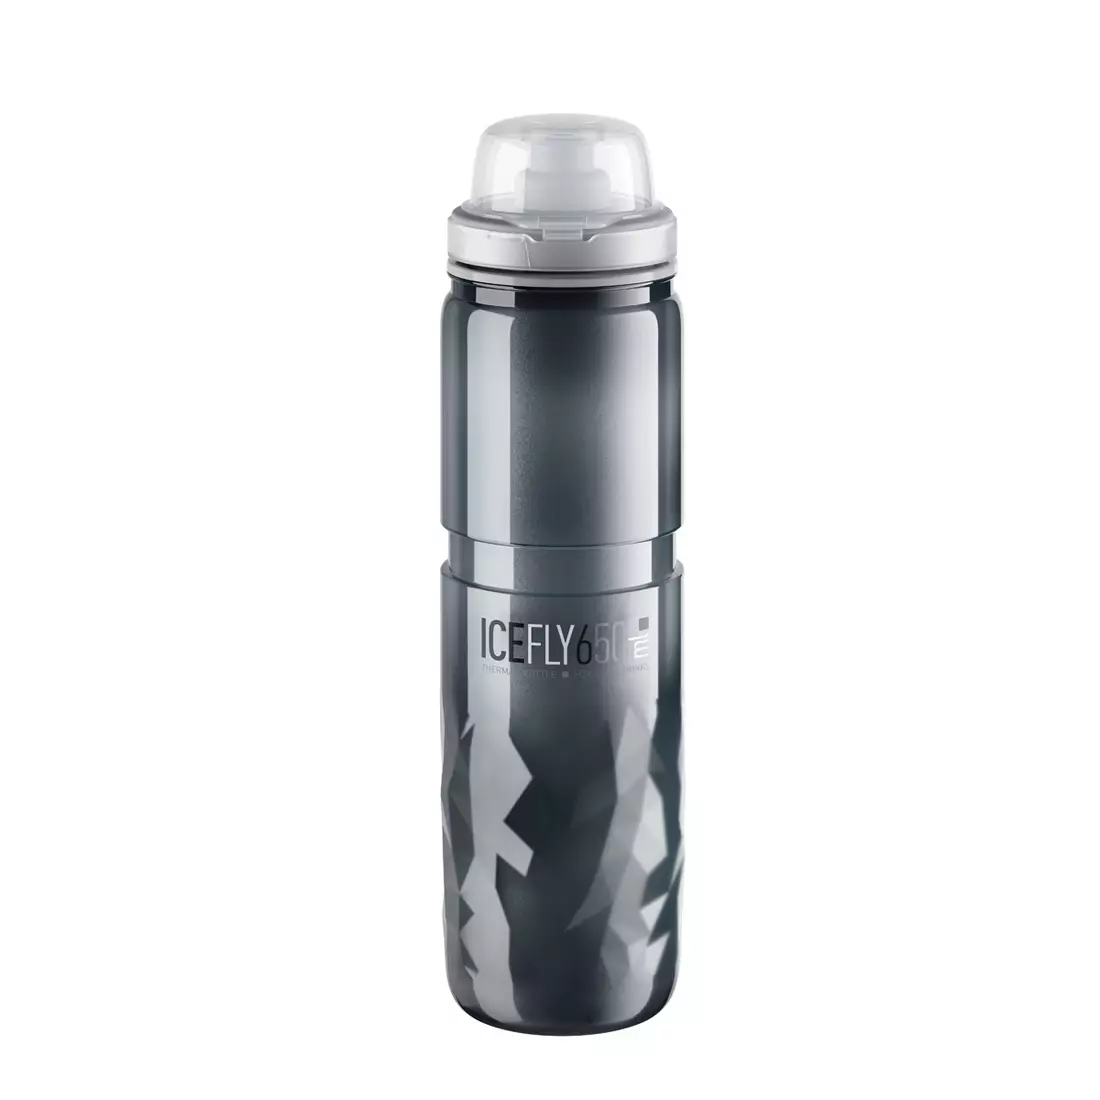 ELITE ICE FLY thermal bicycle bottle 650 ml, gray